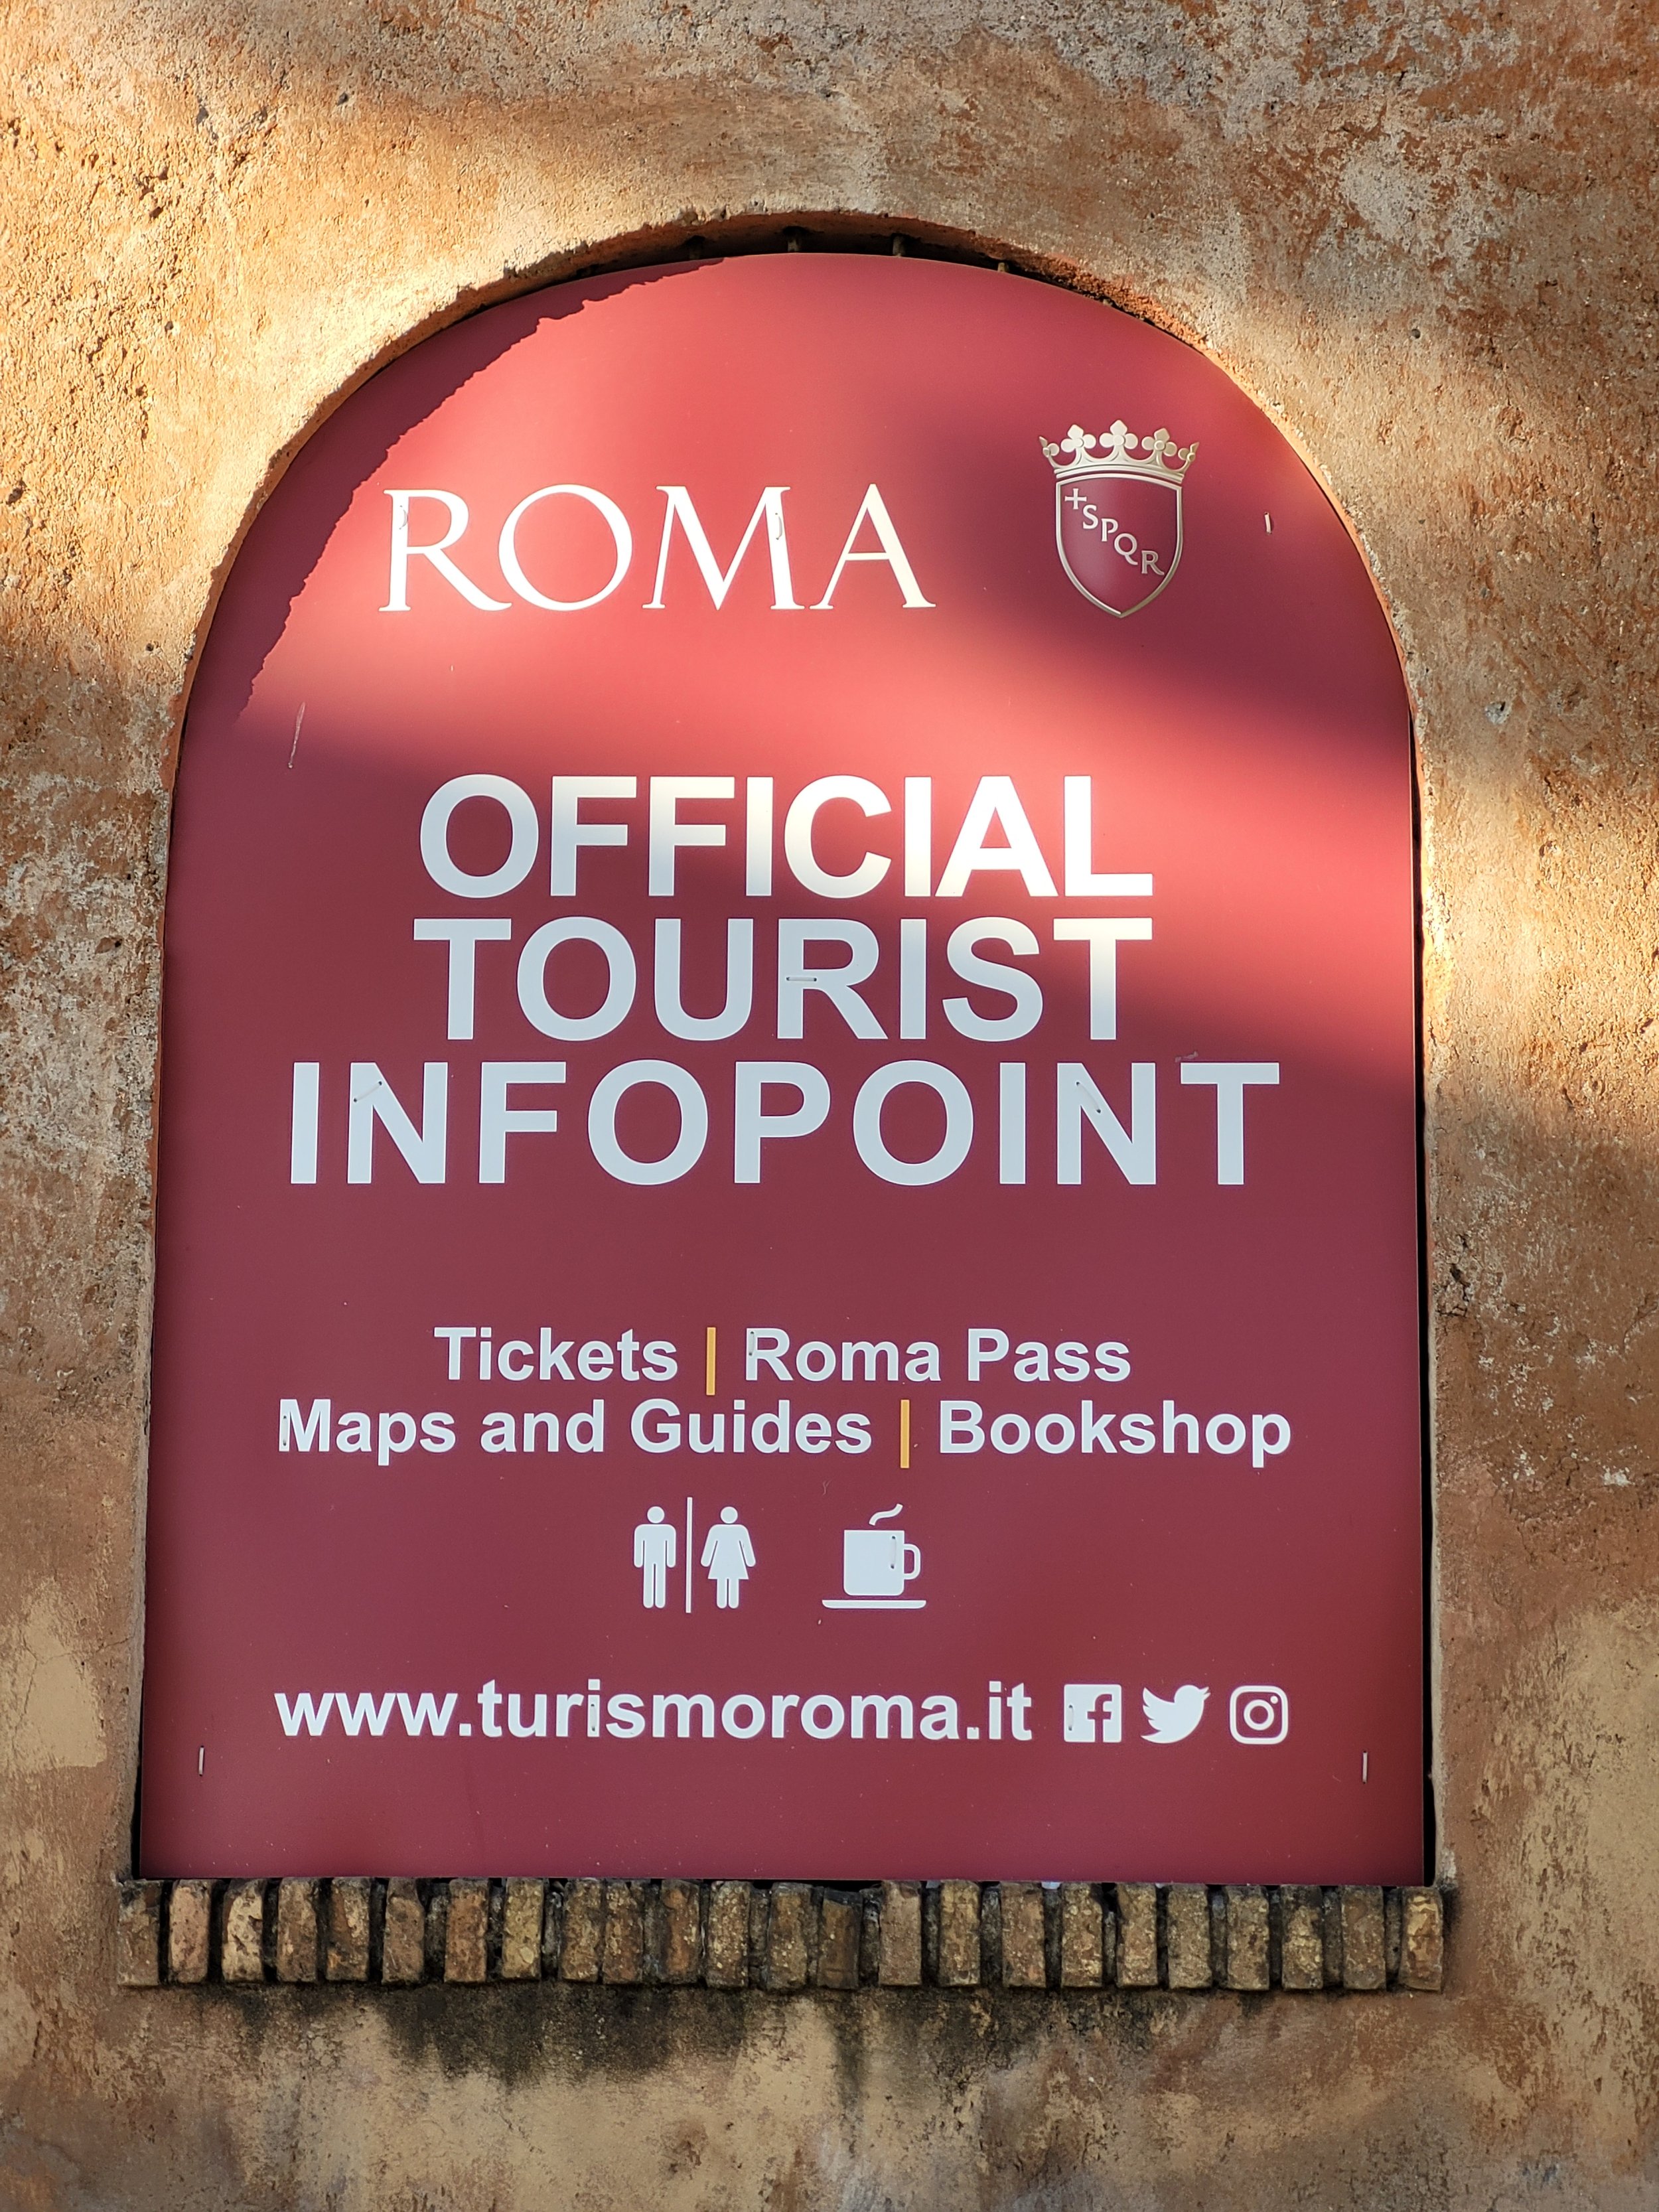 Is the Roma Pass worth it - Where To Buy